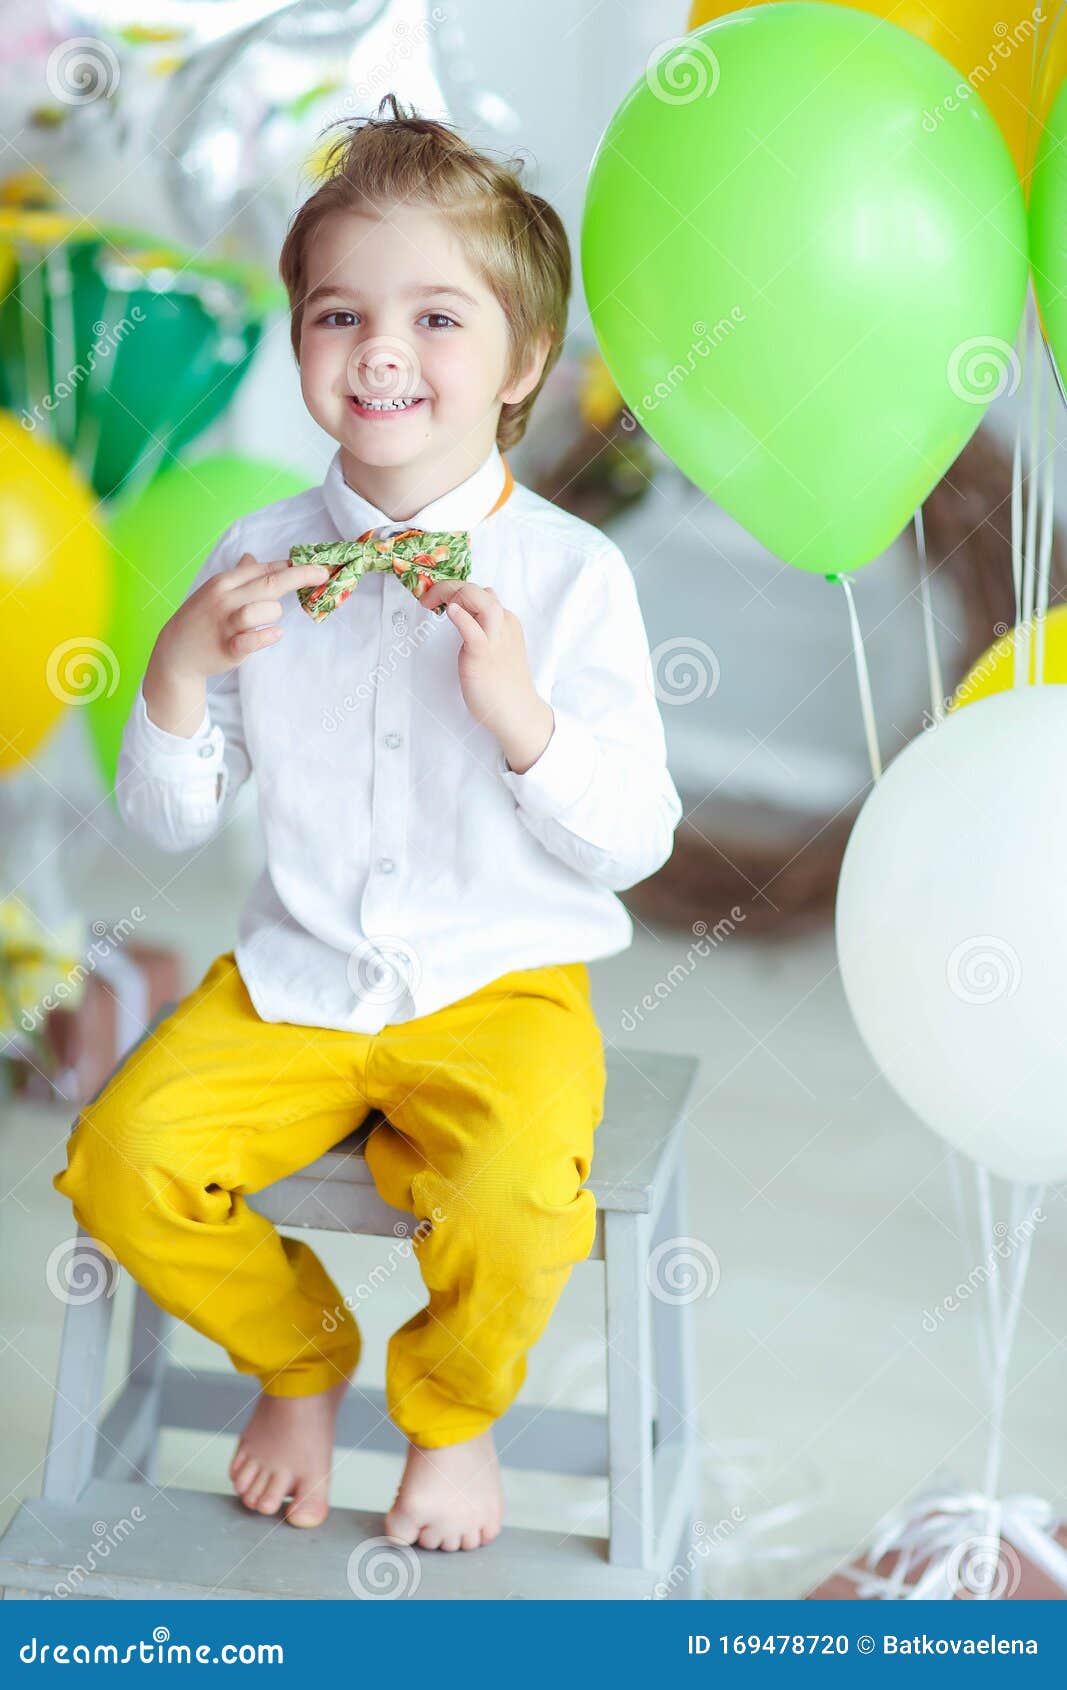 6yearold Boy Jeans Clothes Says That Stock Photo 87011897 | Shutterstock